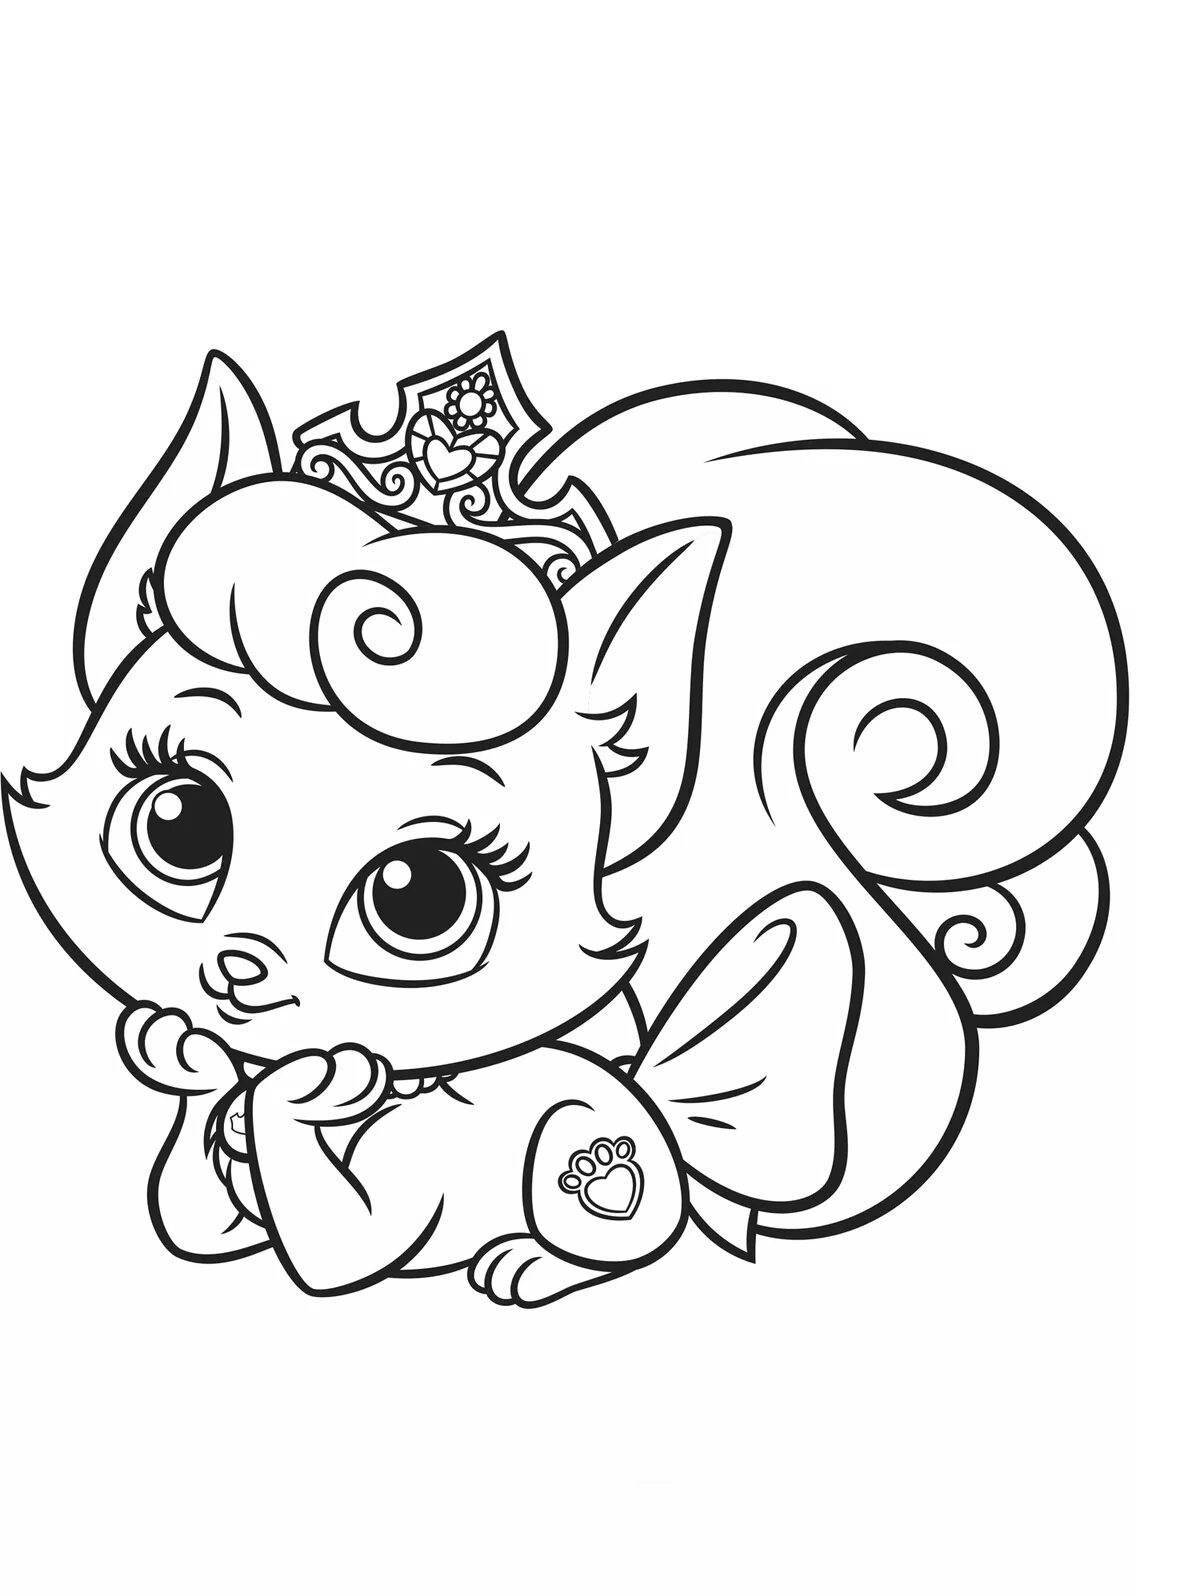 Outstanding Super Pets coloring page